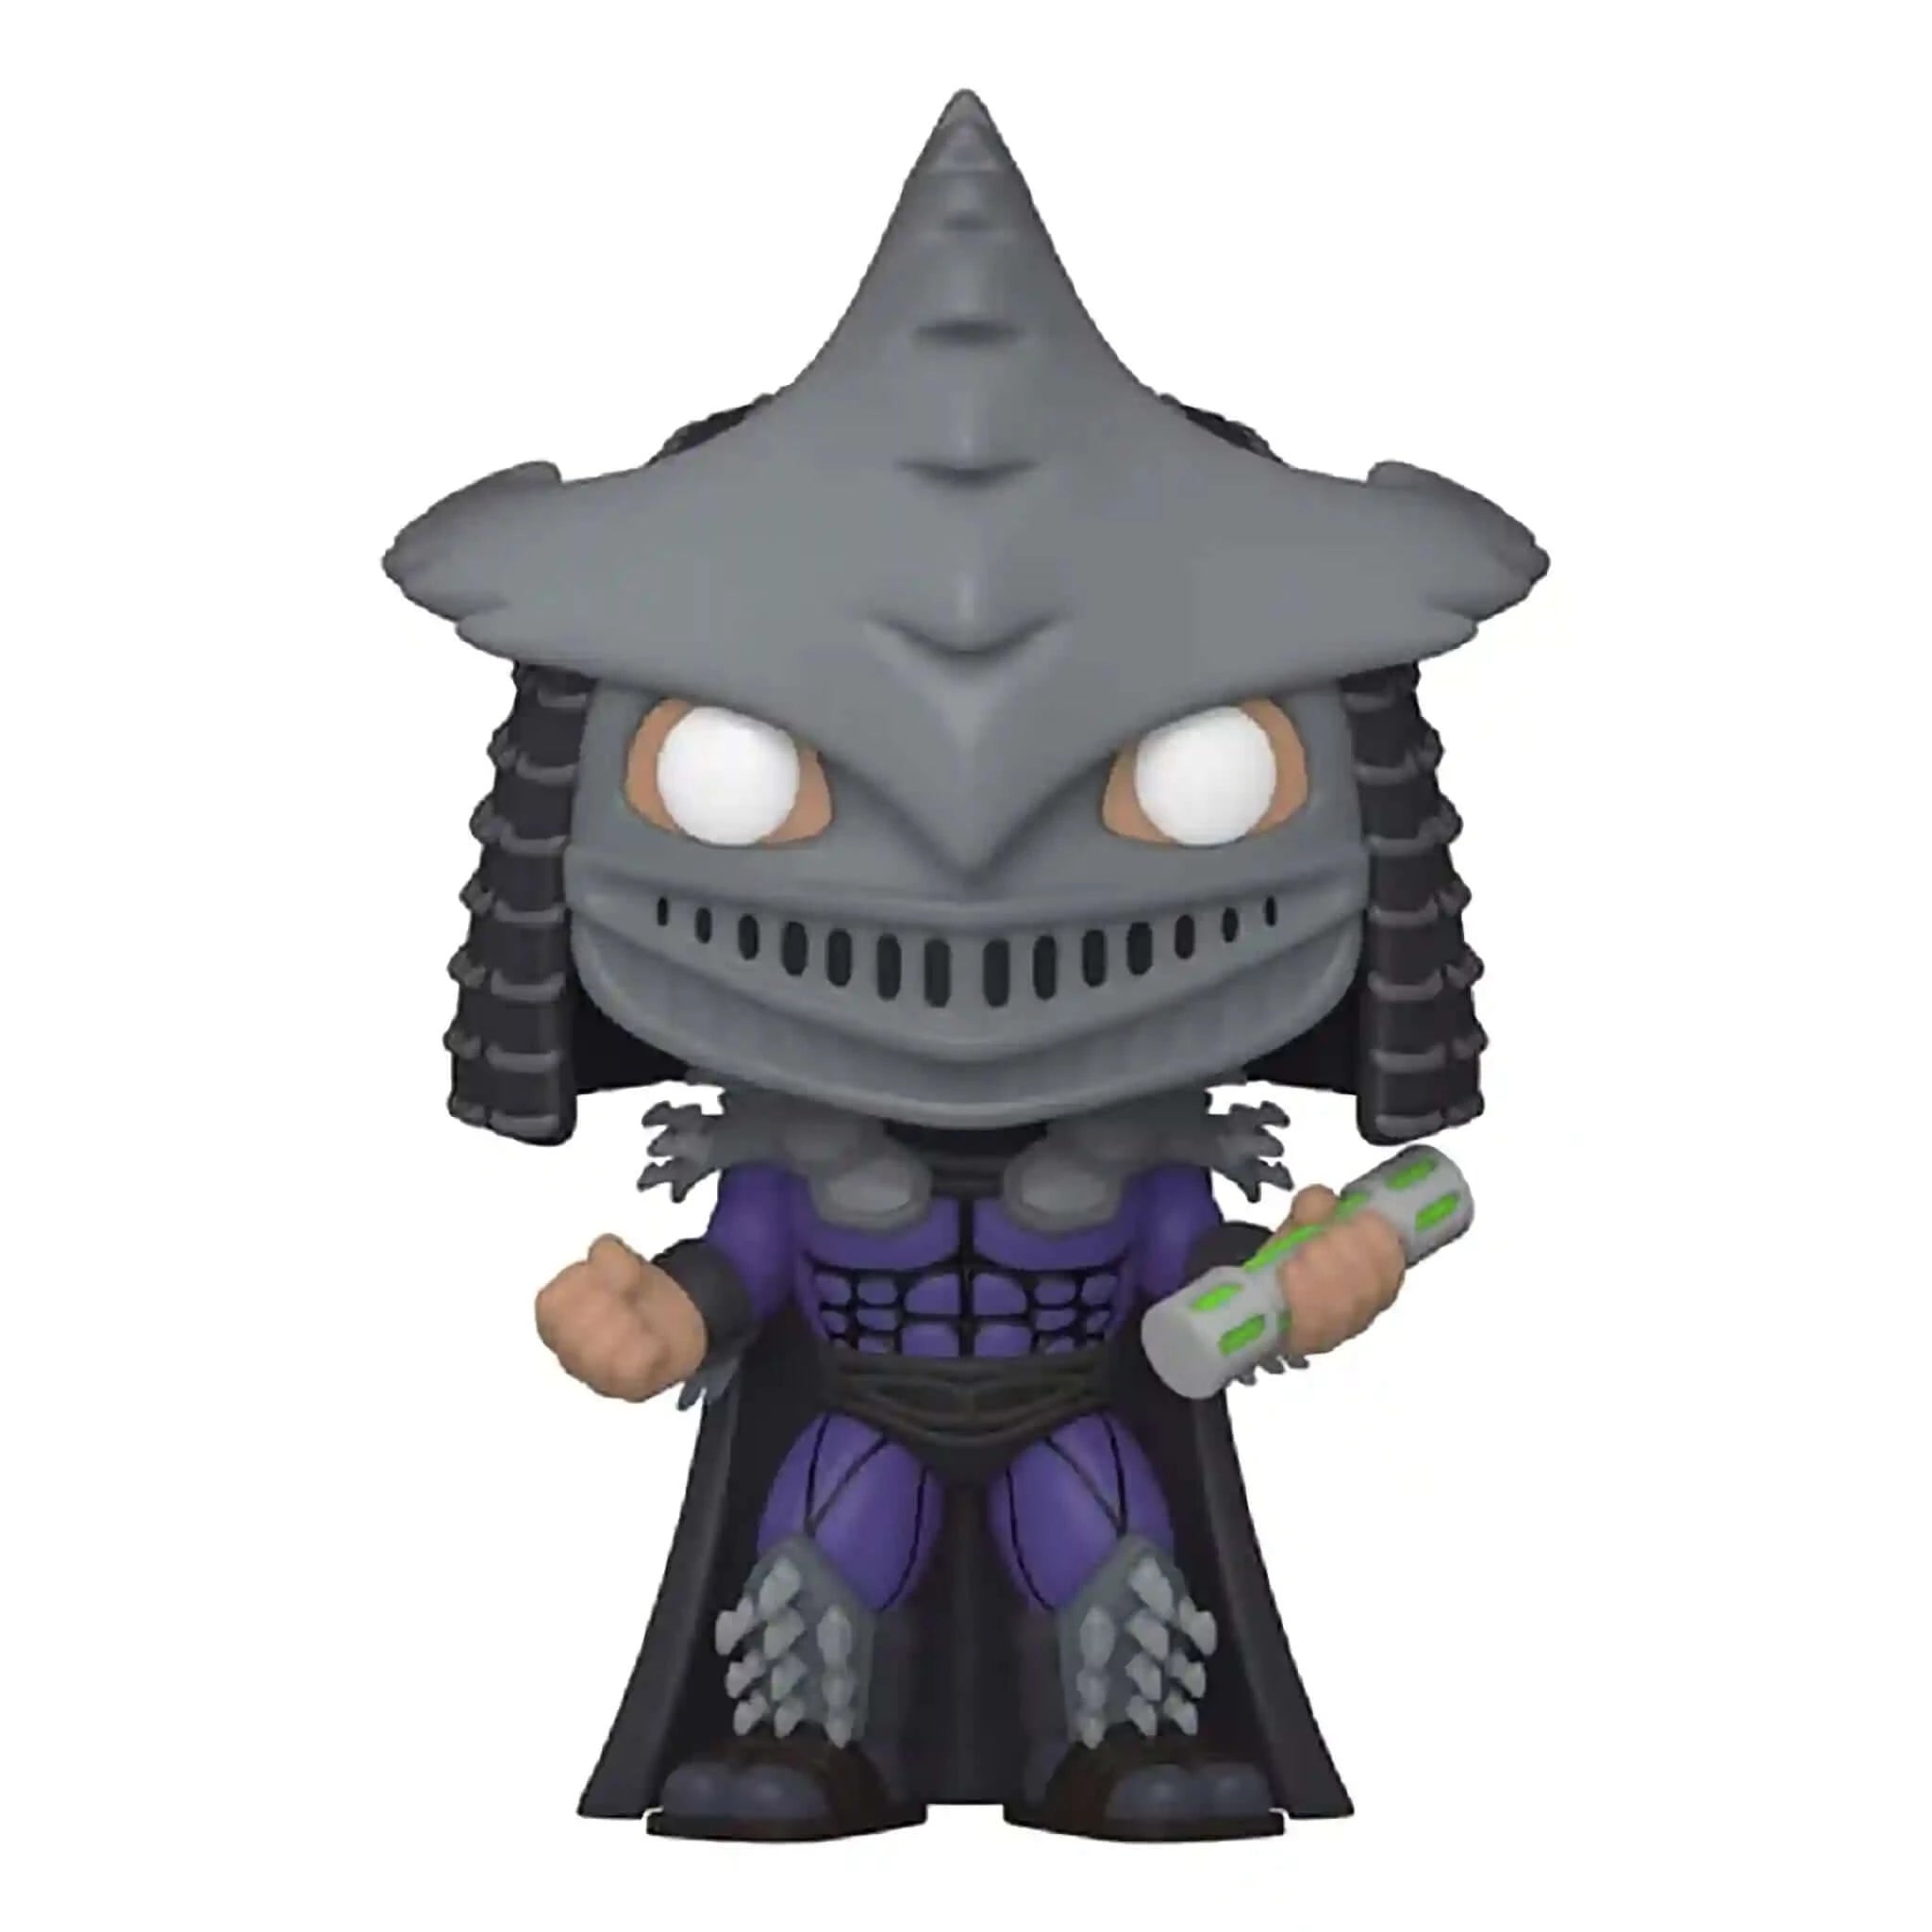 Shredder with Weapon (Glows) Funko Pop! FUNKO EXCLUSIVE-Jingle Truck Toys